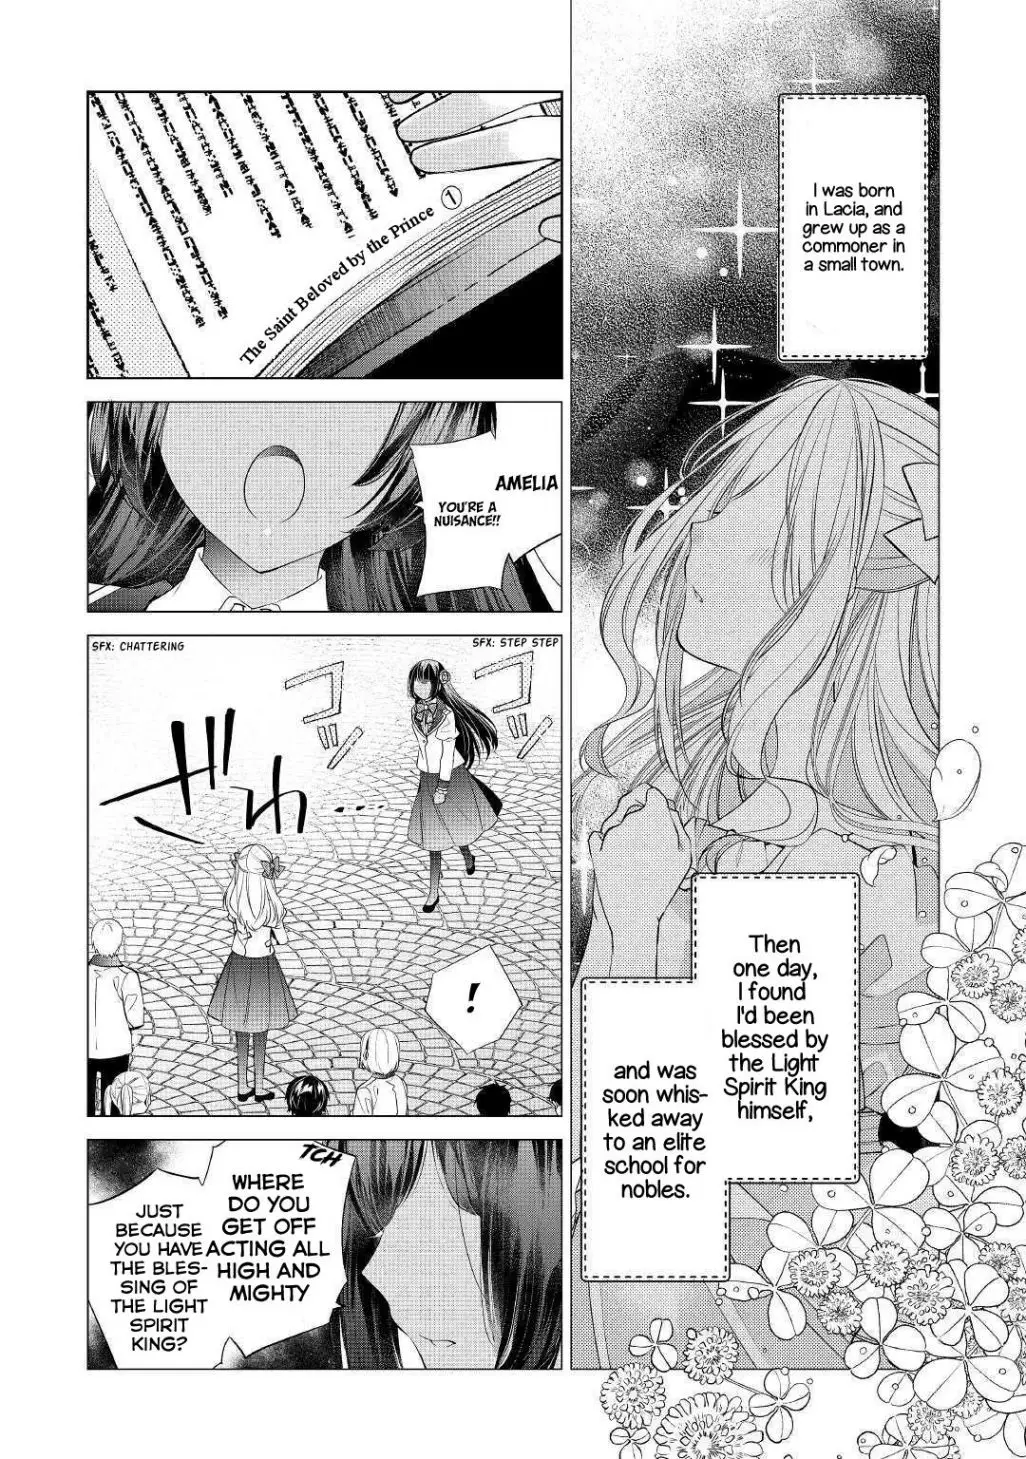 I'm Not a Villainess!! Just Because I Can Control Darkness Doesn’t Mean I’m a Bad Person! - 1 page 2